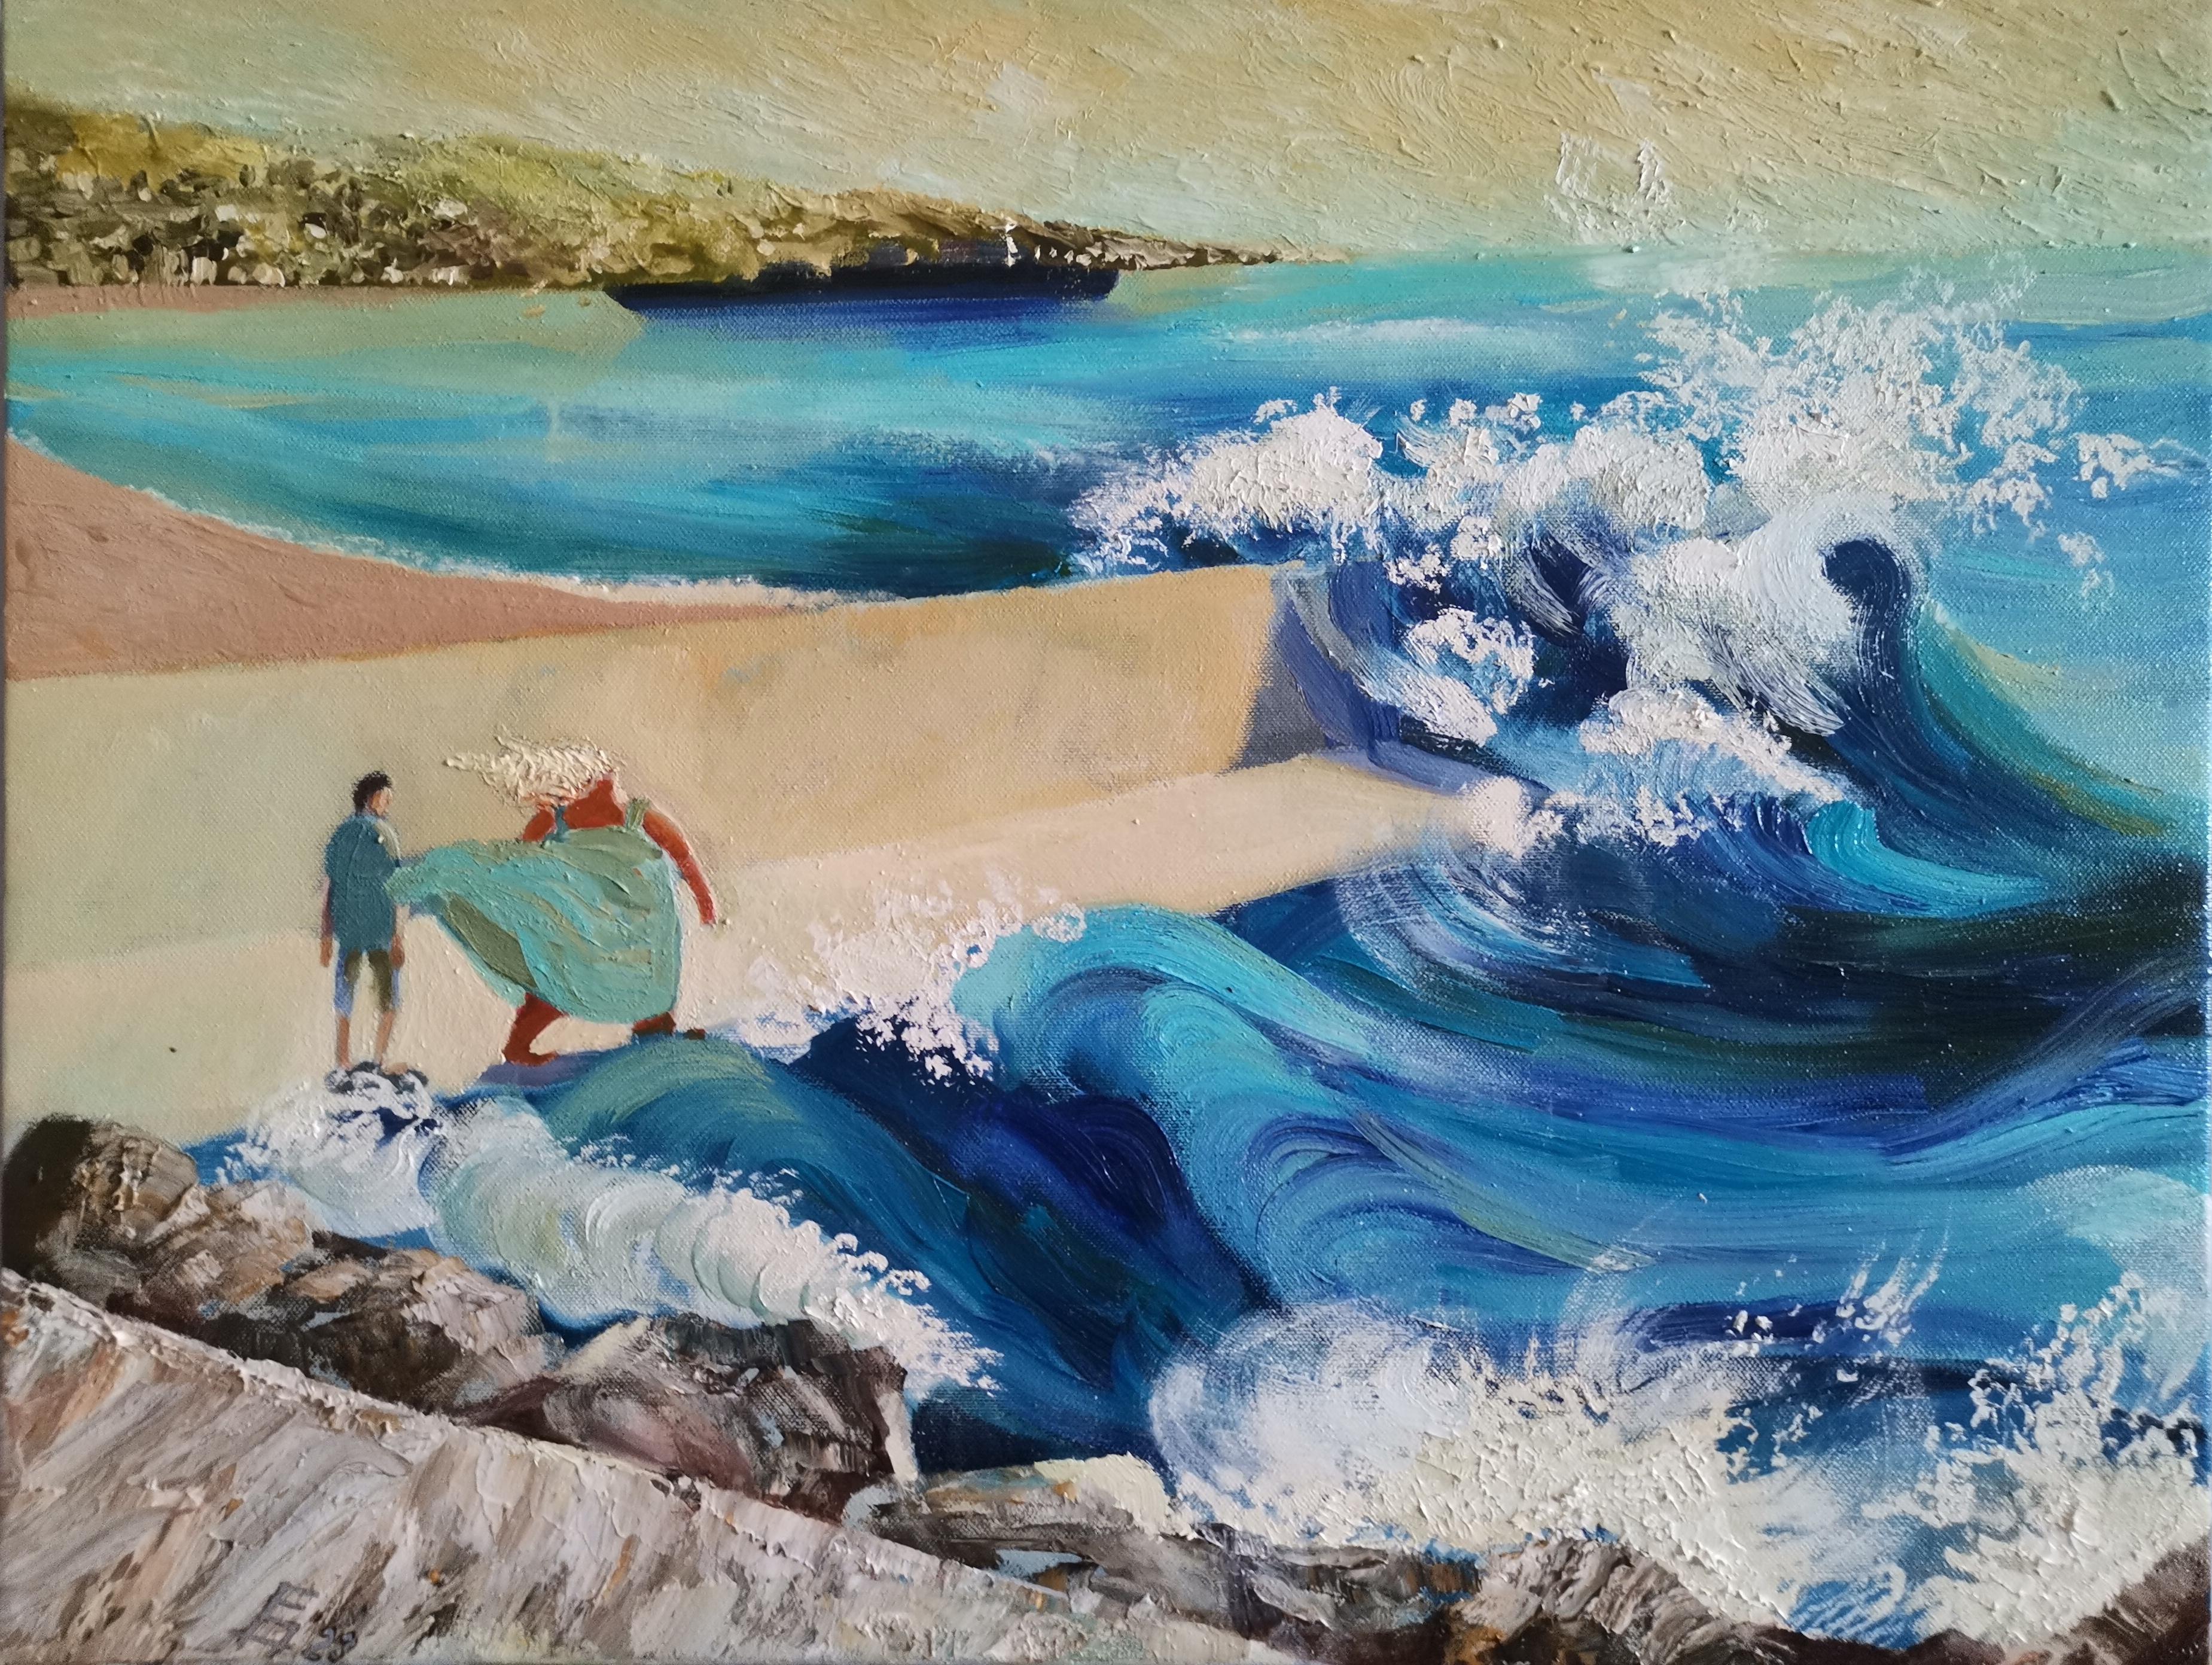 "Stronger in Surf" is a painting by the Bulgarian artist painter Maestro Eleonora Droumeva.

About the artwork:

TECHNIQUE:  oil painting
STYLE: Modernist, Contemporary
Edition : Unique, signed
Weight: Approximately 2 kg.

The painting is